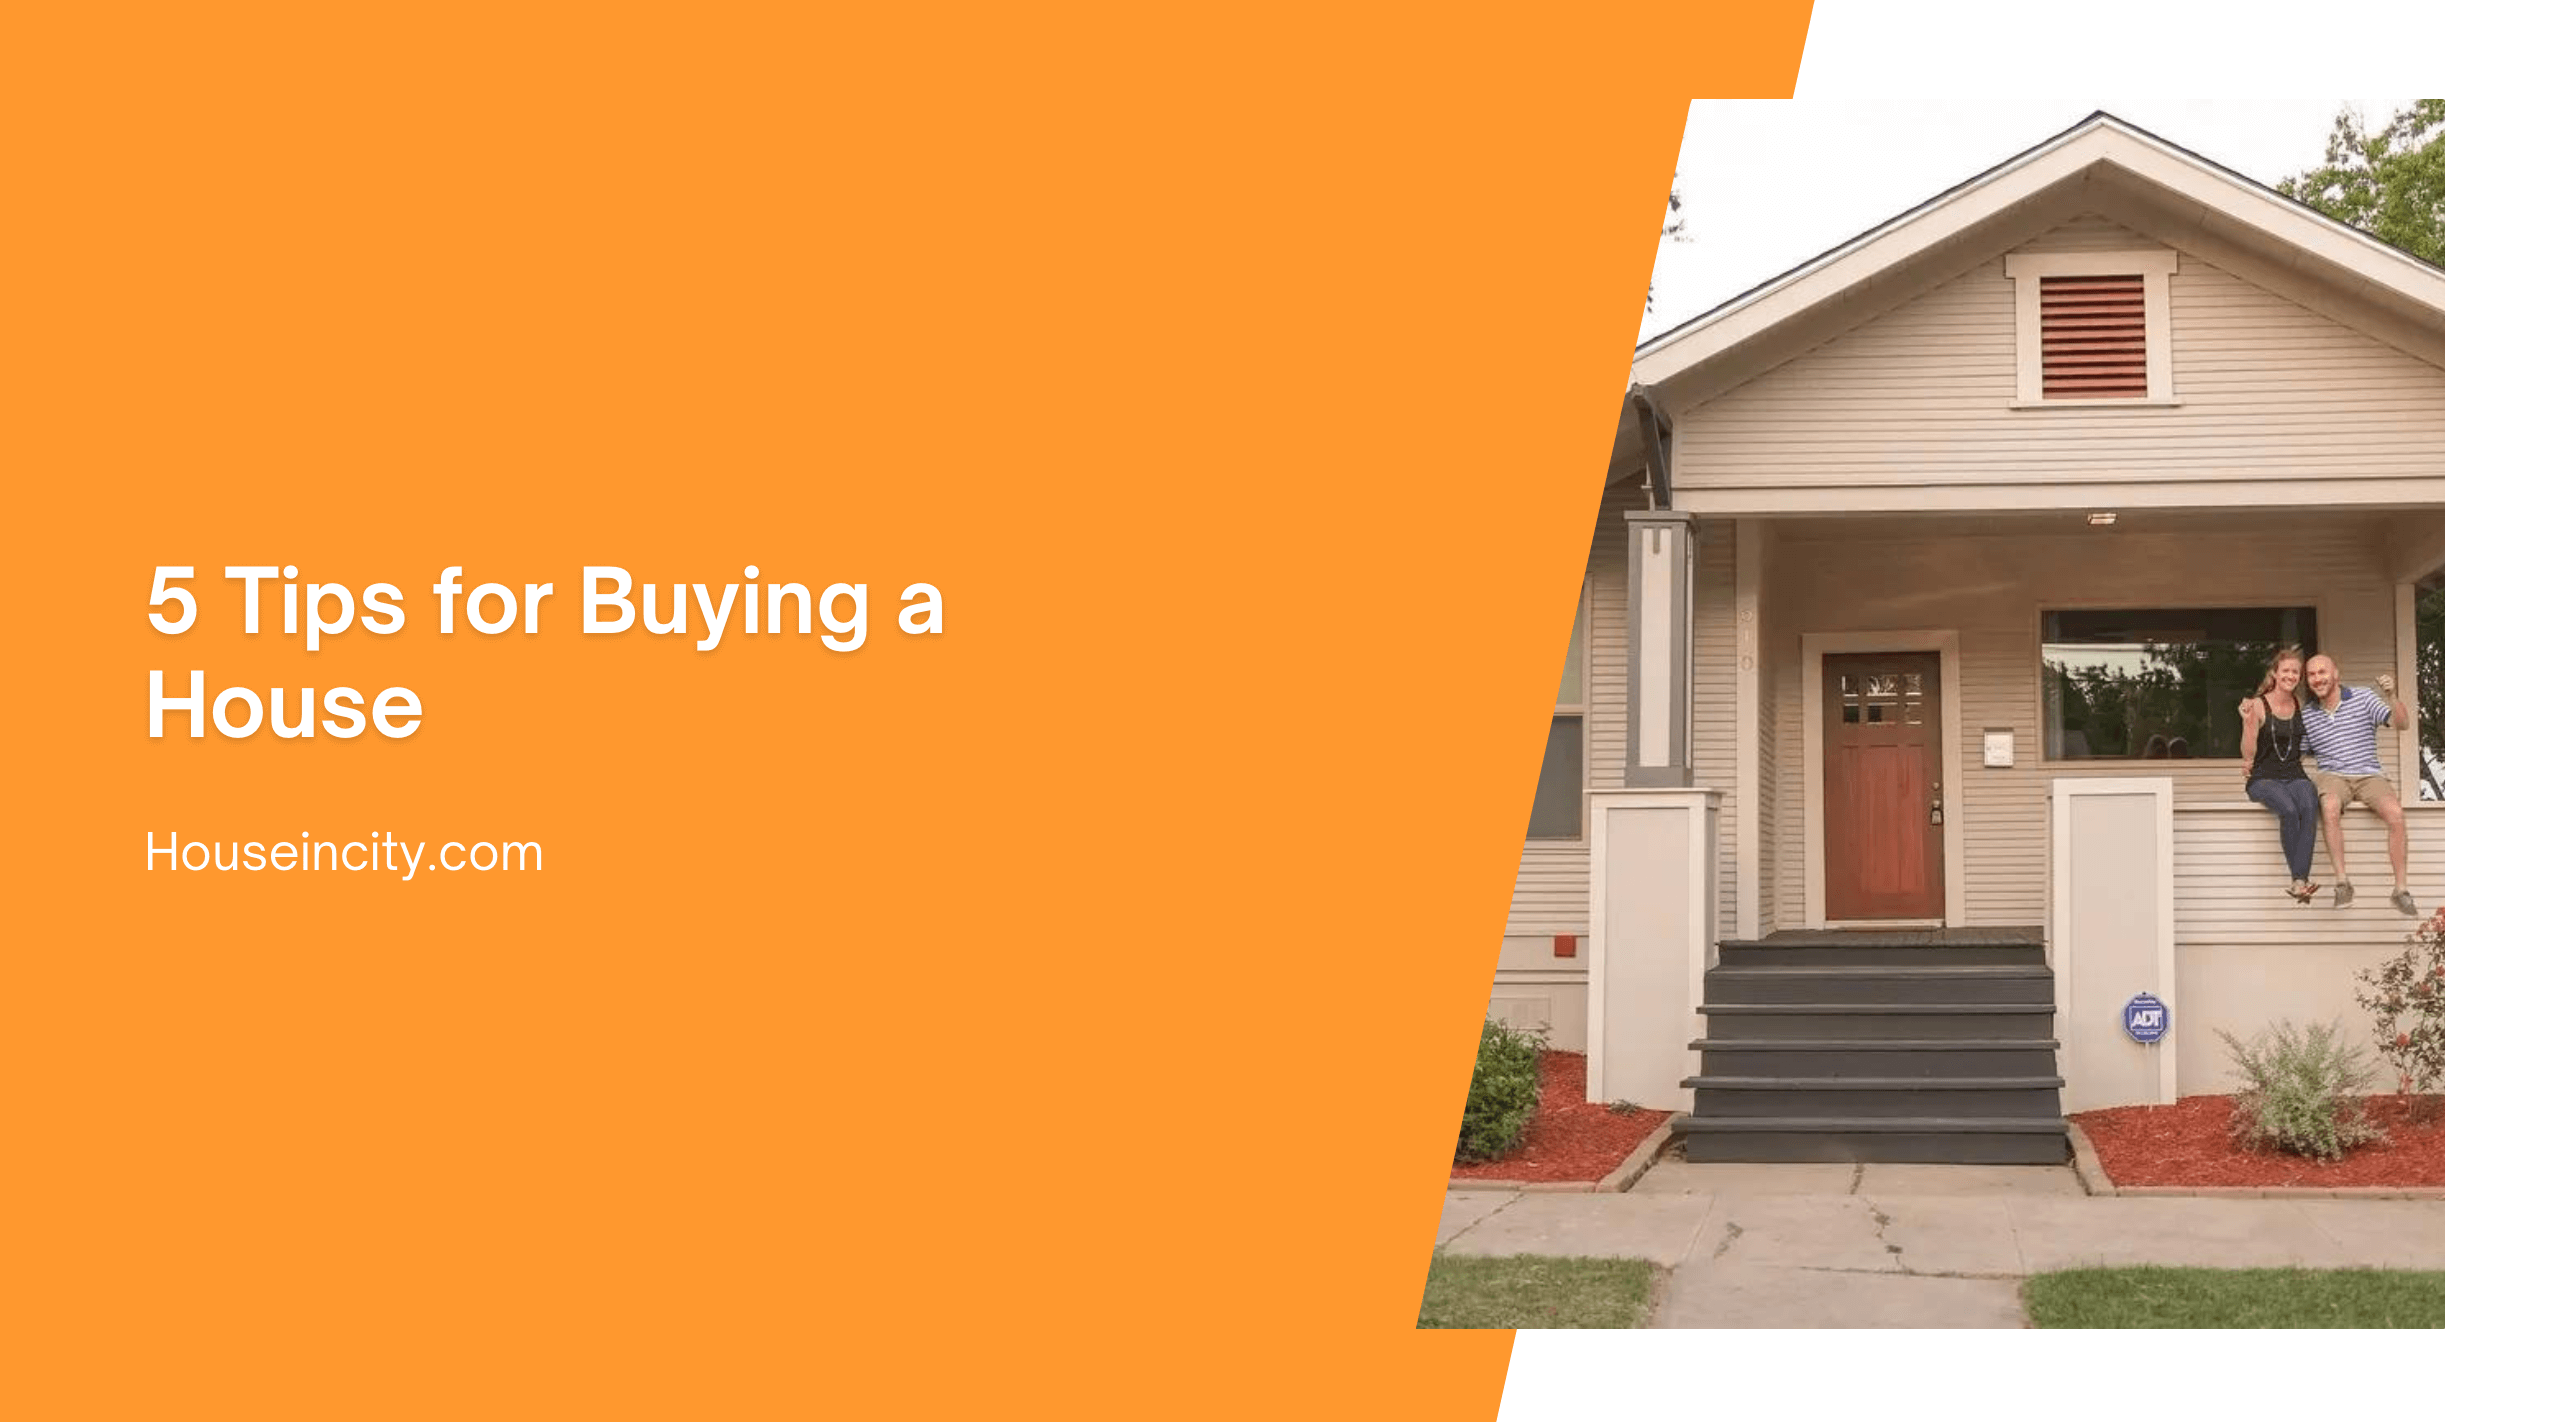 5 Tips for Buying a House